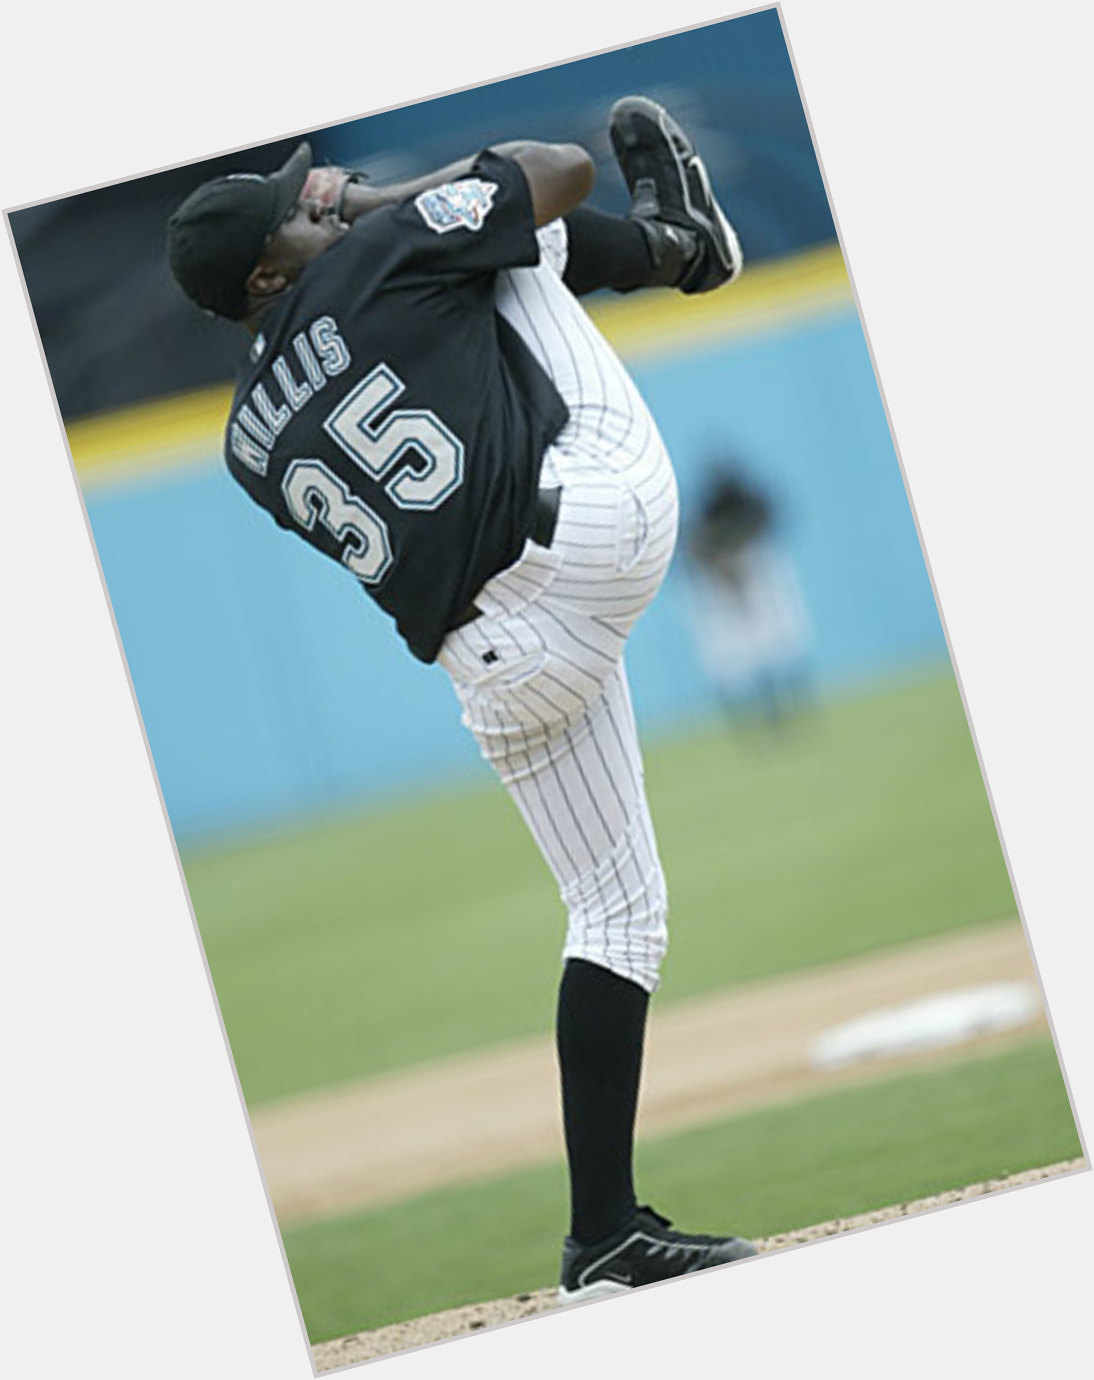 HAPPY BIRTHDAY TO ONE OF THE MOST ELECTRIFYING PITCHERS OF ALL-TIME, DONTRELLE WILLIS  